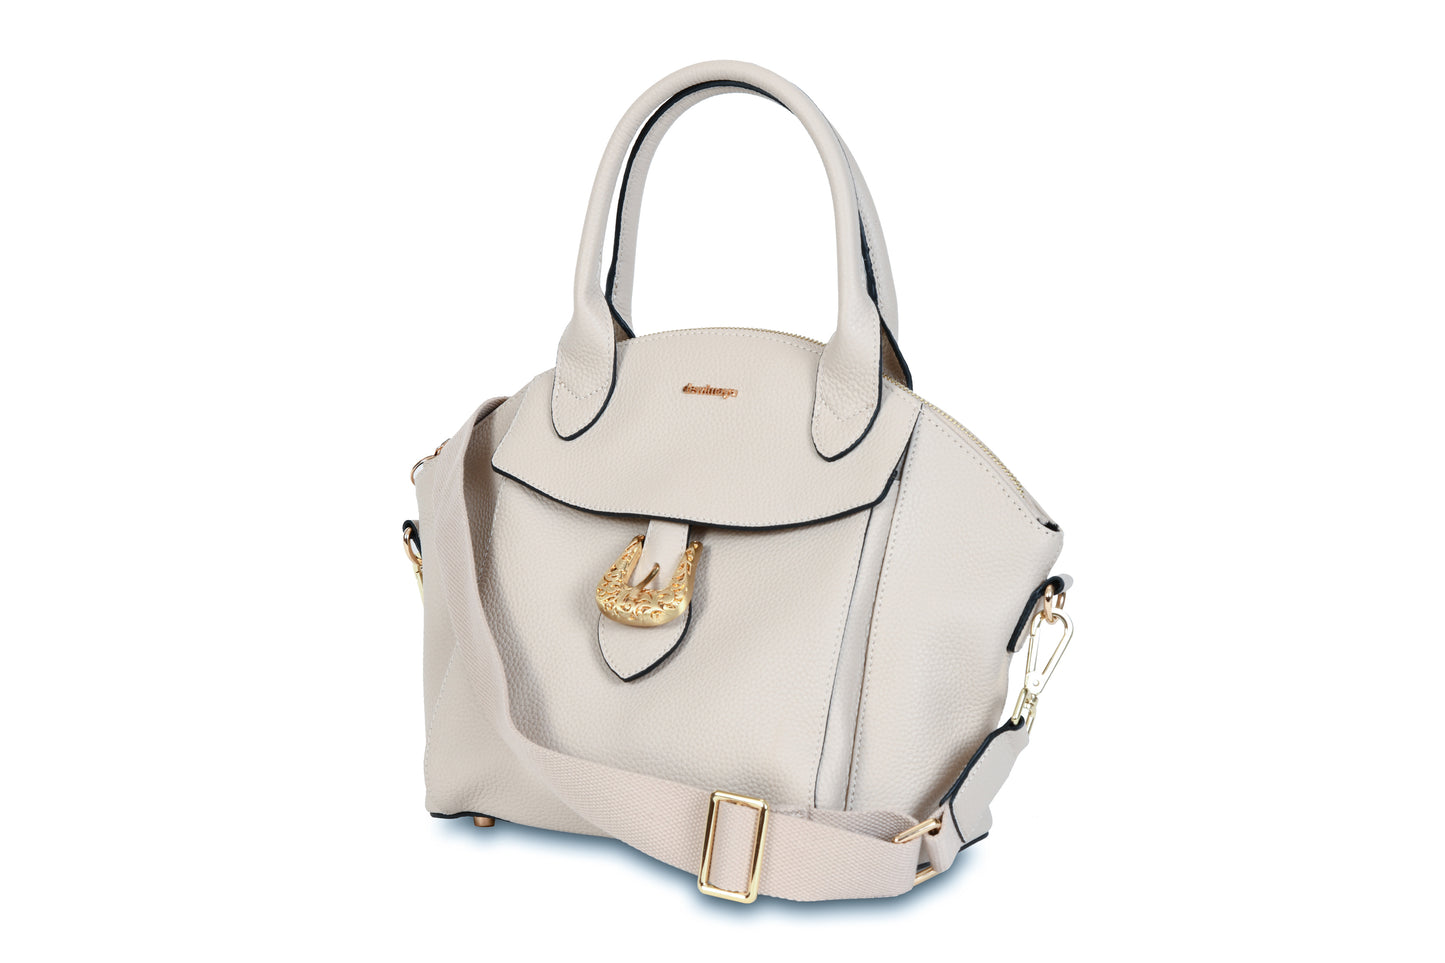 Bali Pebble Grain Leather Cream White Handbag made by Dewi Maya with shoulder strap available at the best boutique in Upstate South Carolina Spartanburg Greenville Dewi Maya Boutique